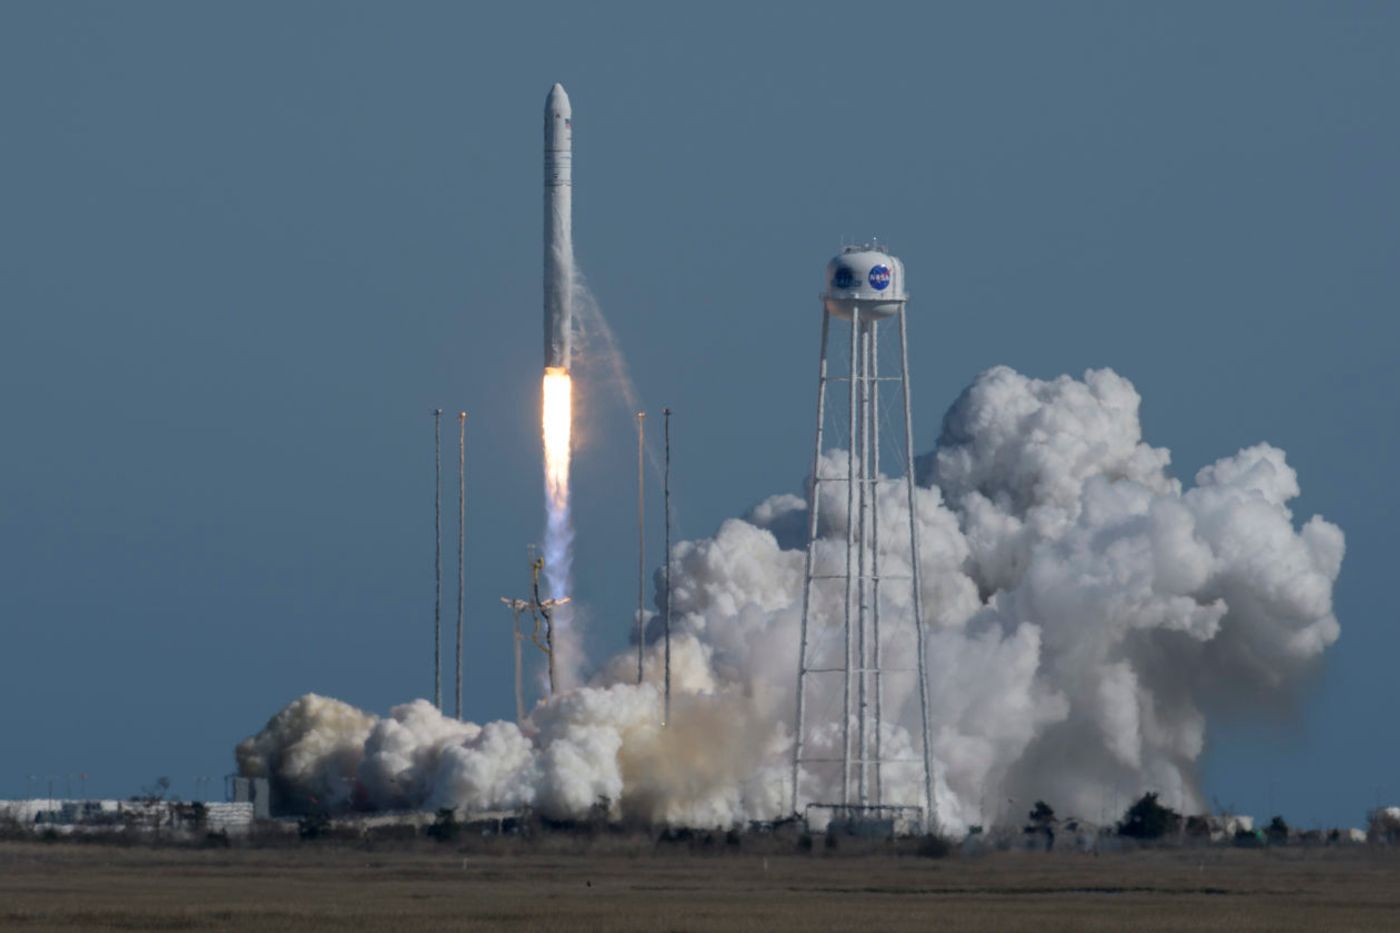 A photograph of the Antares rocket launch last week.